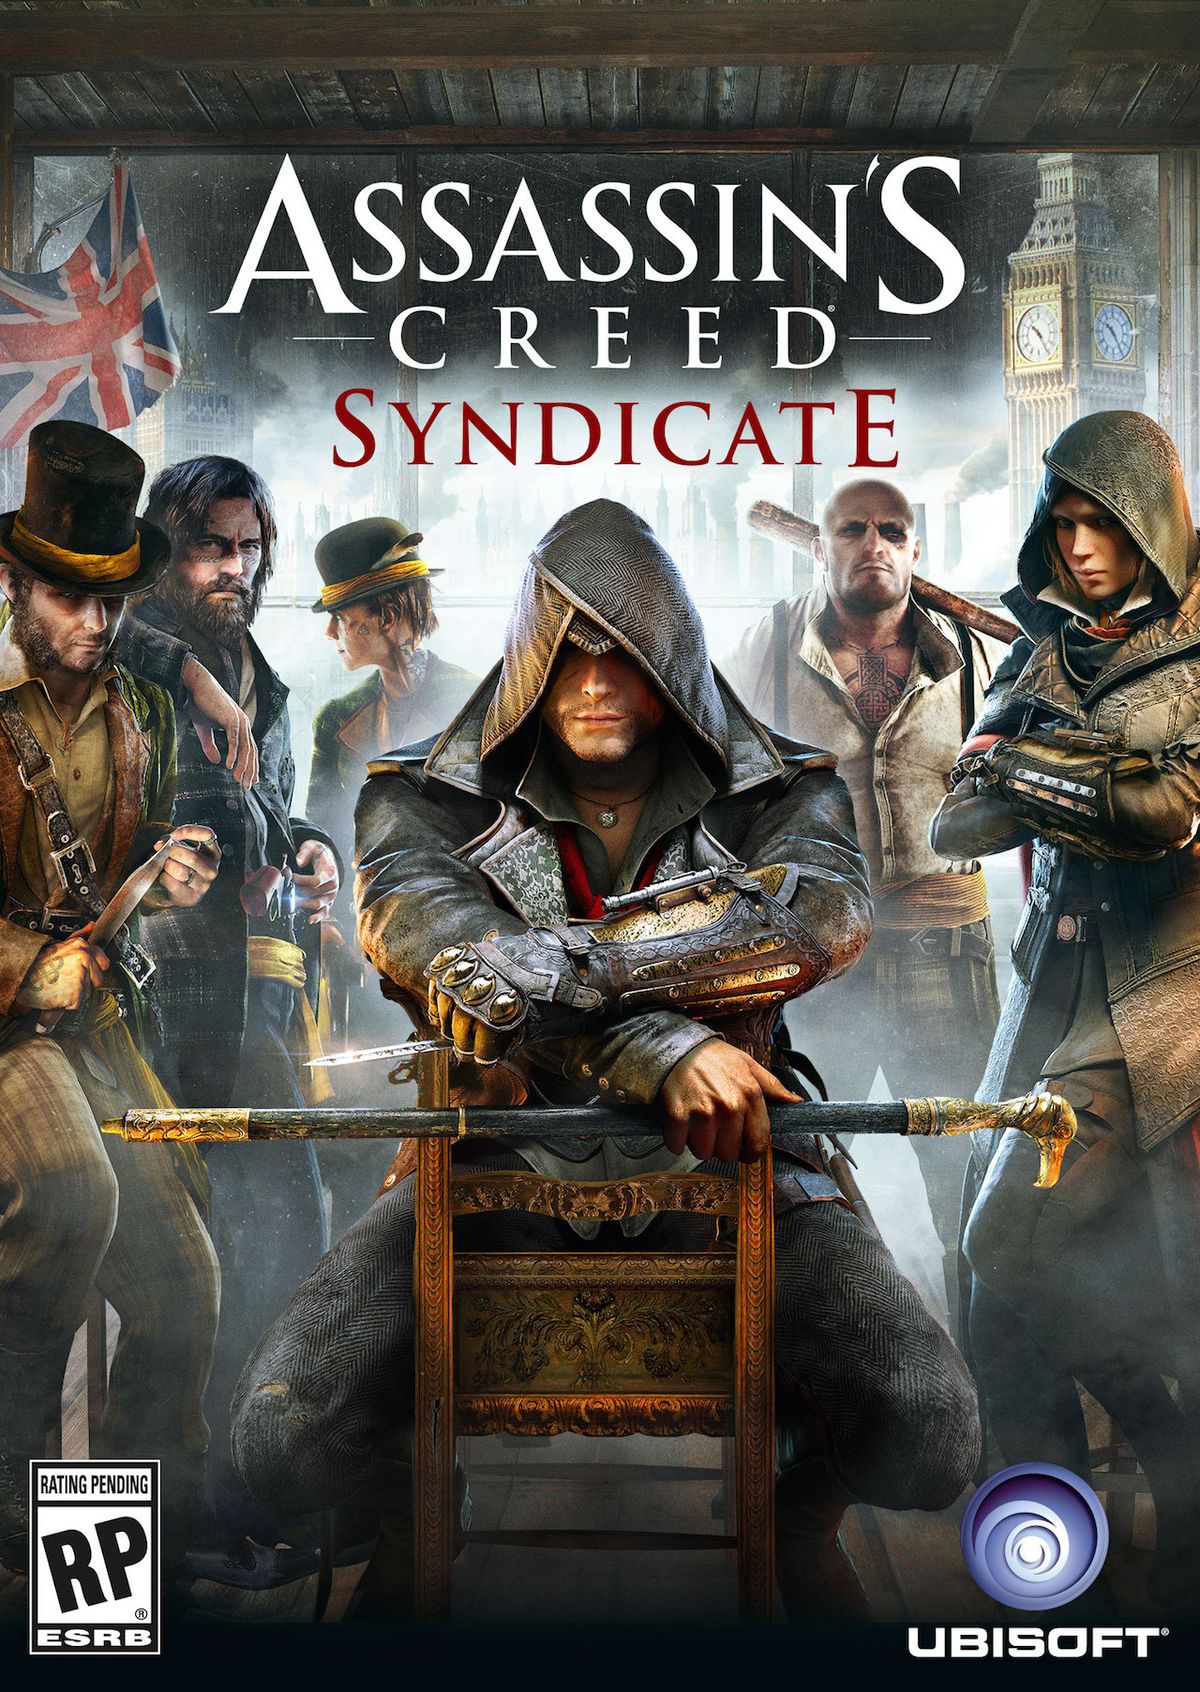 Person in charge of sports game Forge Compress Assassin's Creed Syndicate launching Oct. 23, set in Victorian London -  Polygon